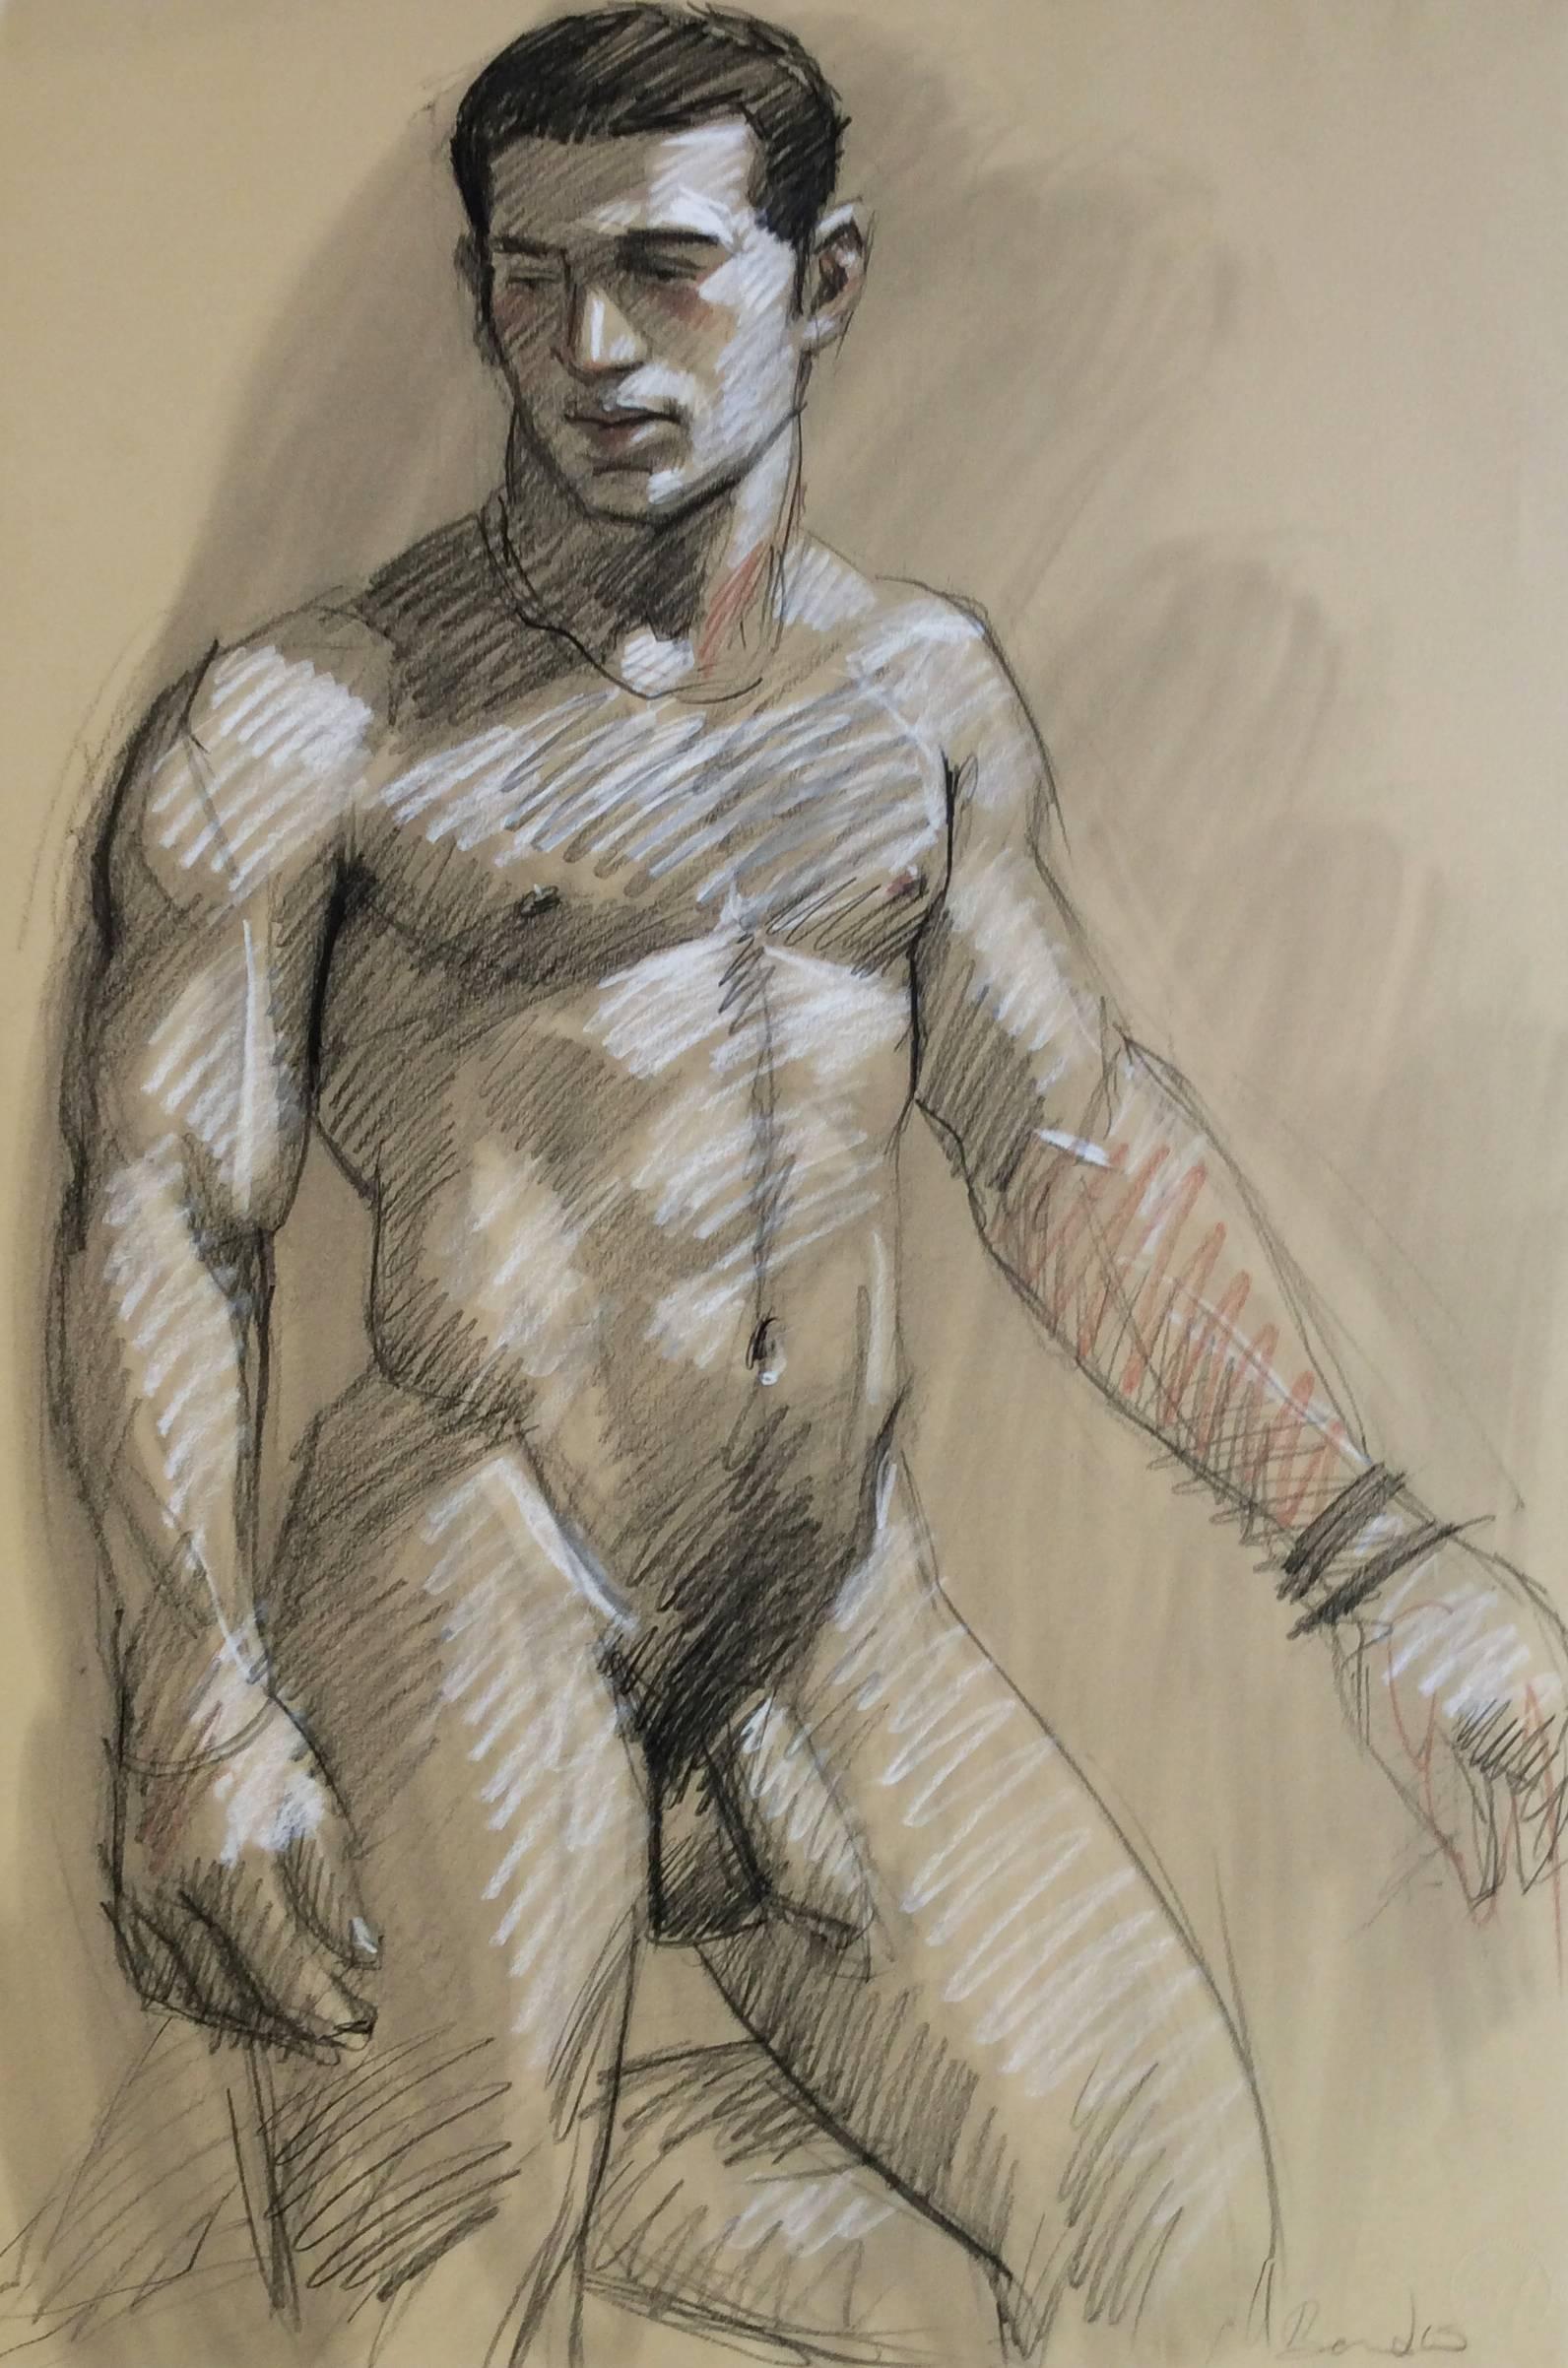 MB 820 B (Contemporary Academic Style Male Nude Figurative Drawing on Paper)